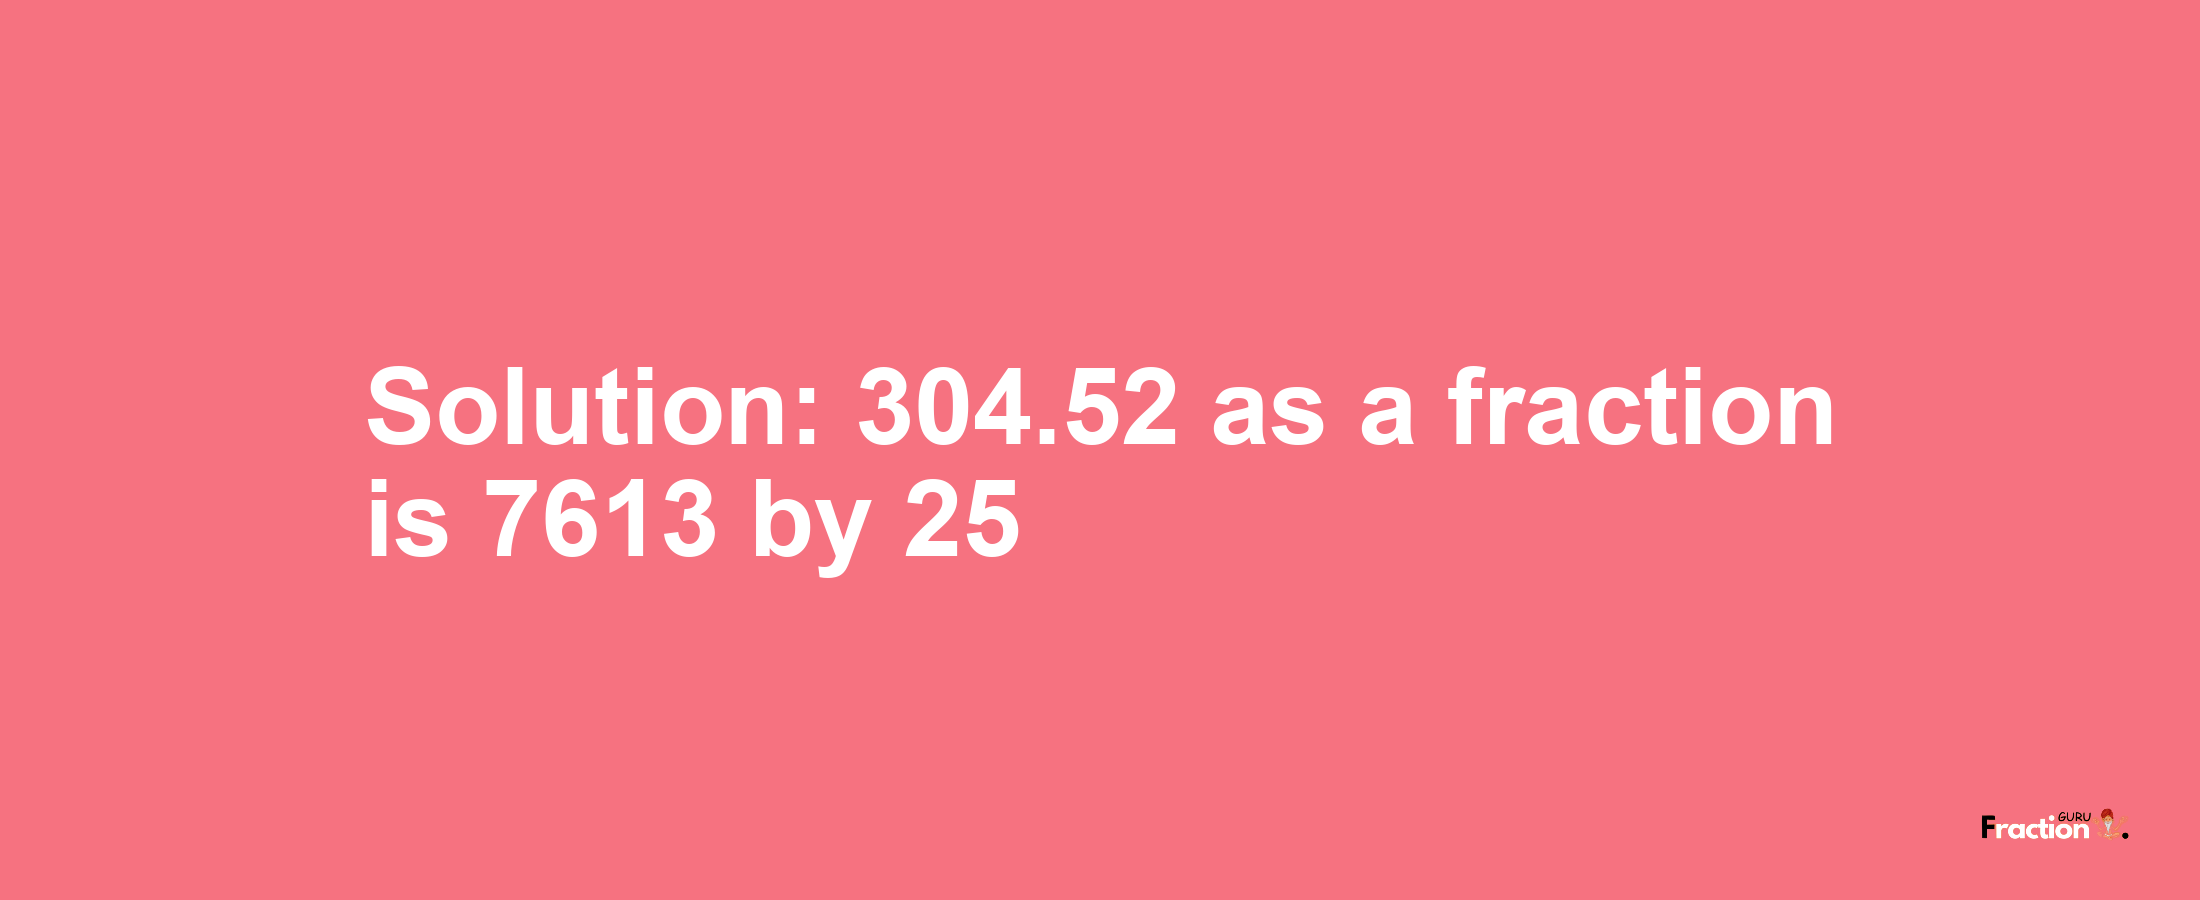 Solution:304.52 as a fraction is 7613/25